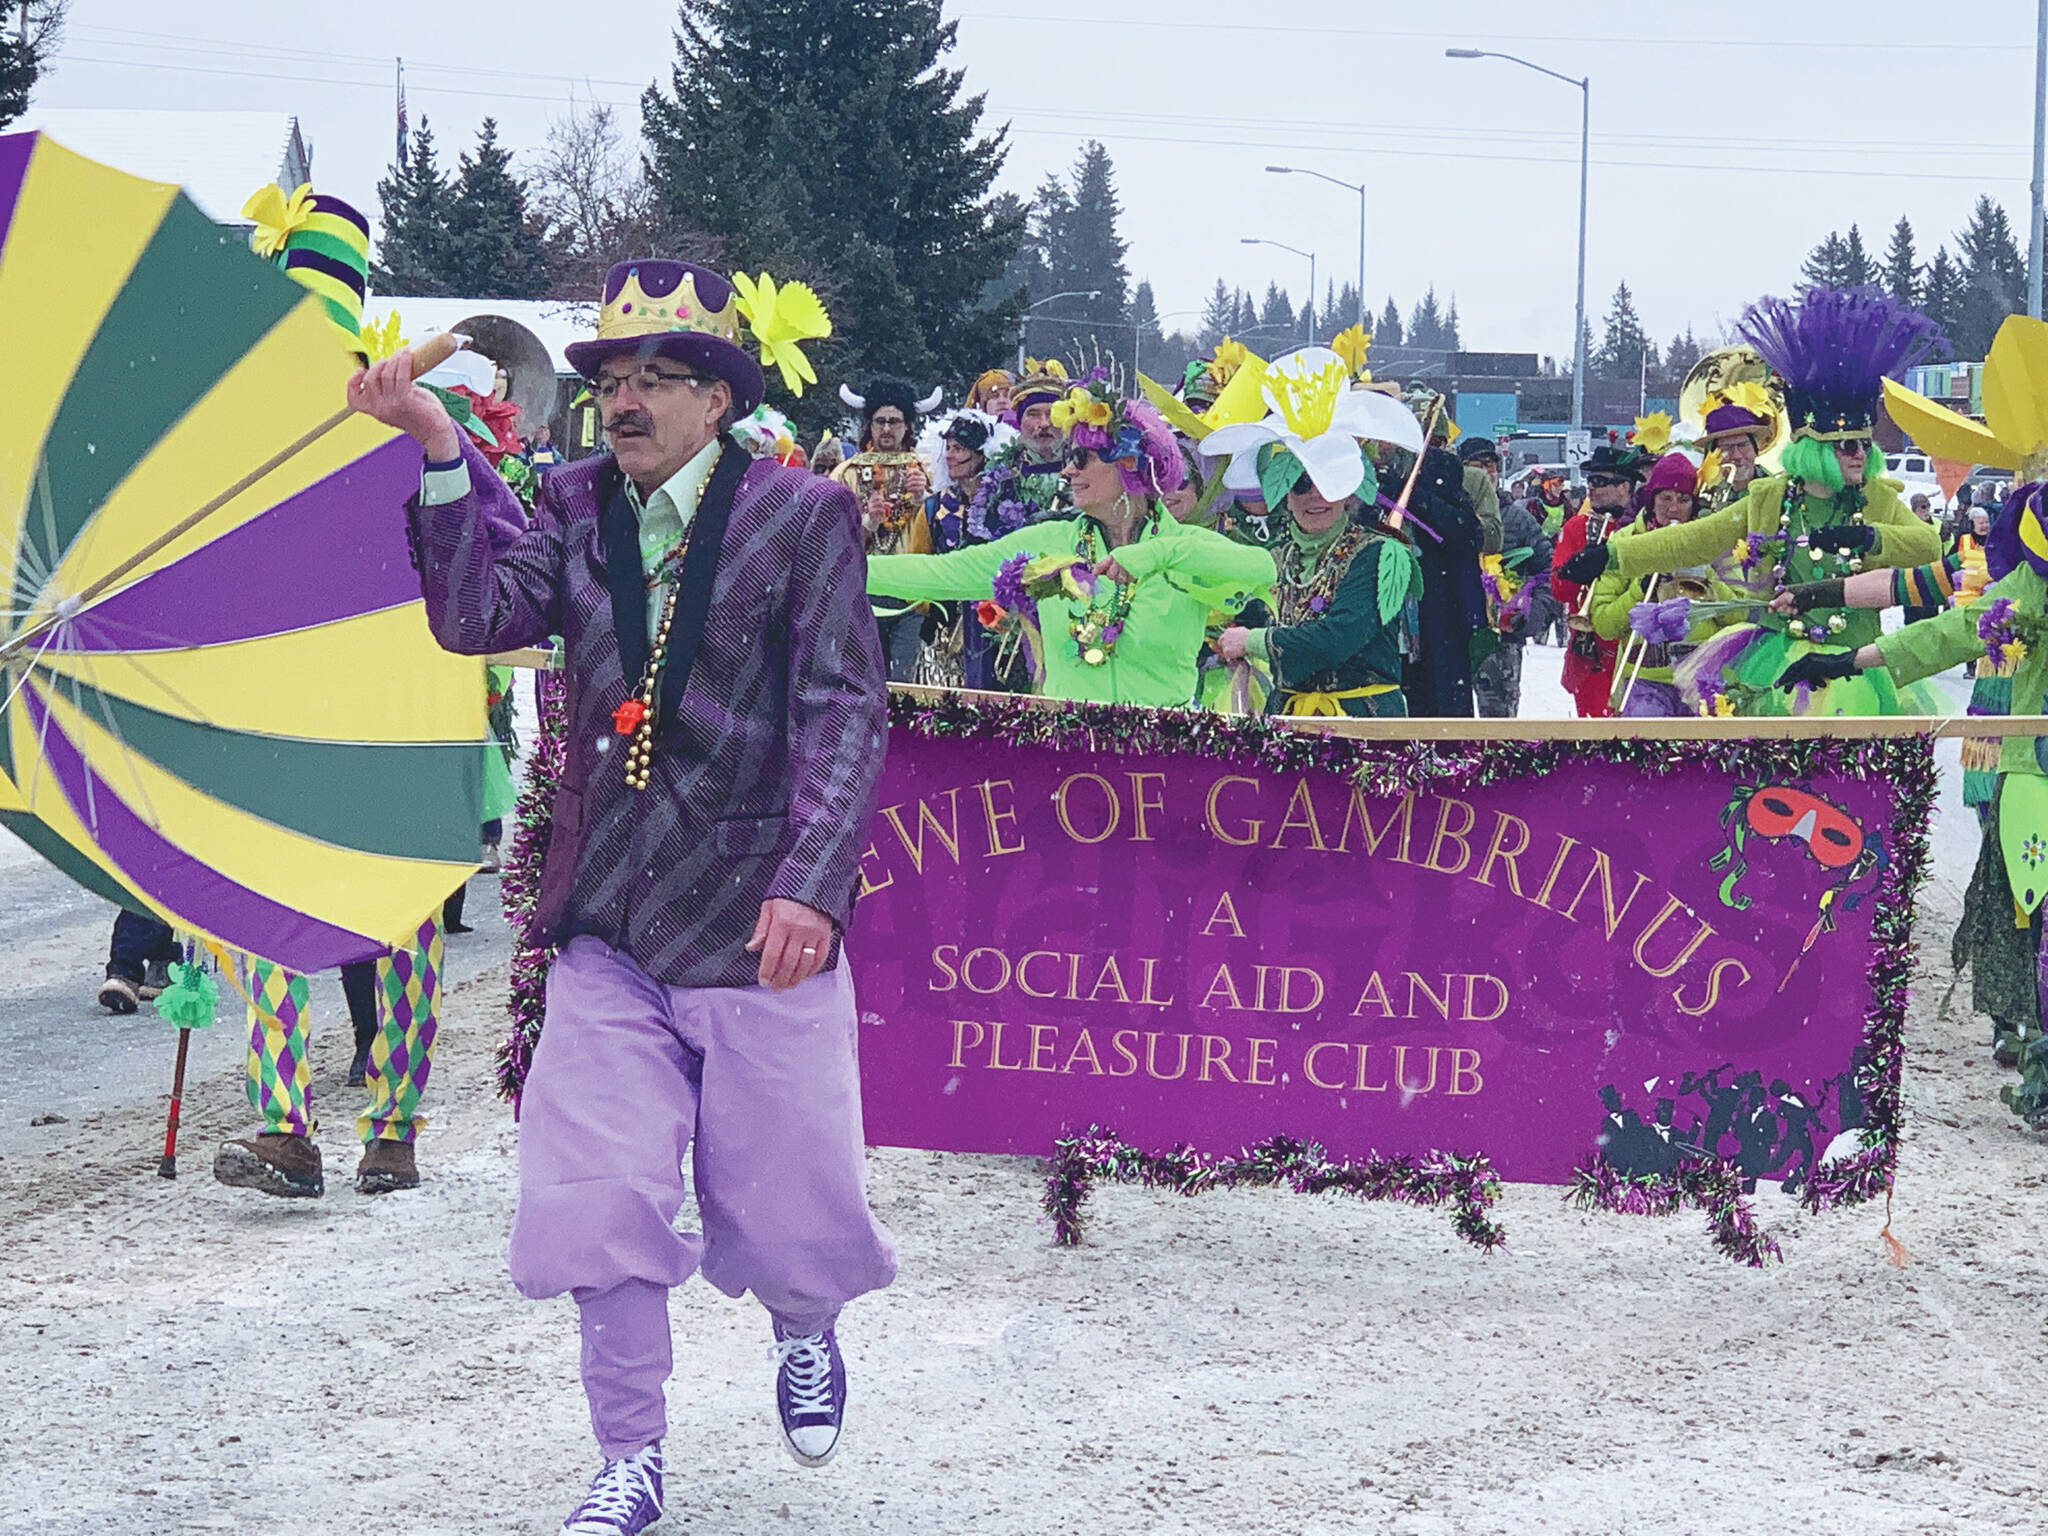 Krew of Gambrinus Social Club float in the Homer Winter Carnival parade on Feb. 11, 2023. Photo by Christina Whiting/Homer News)